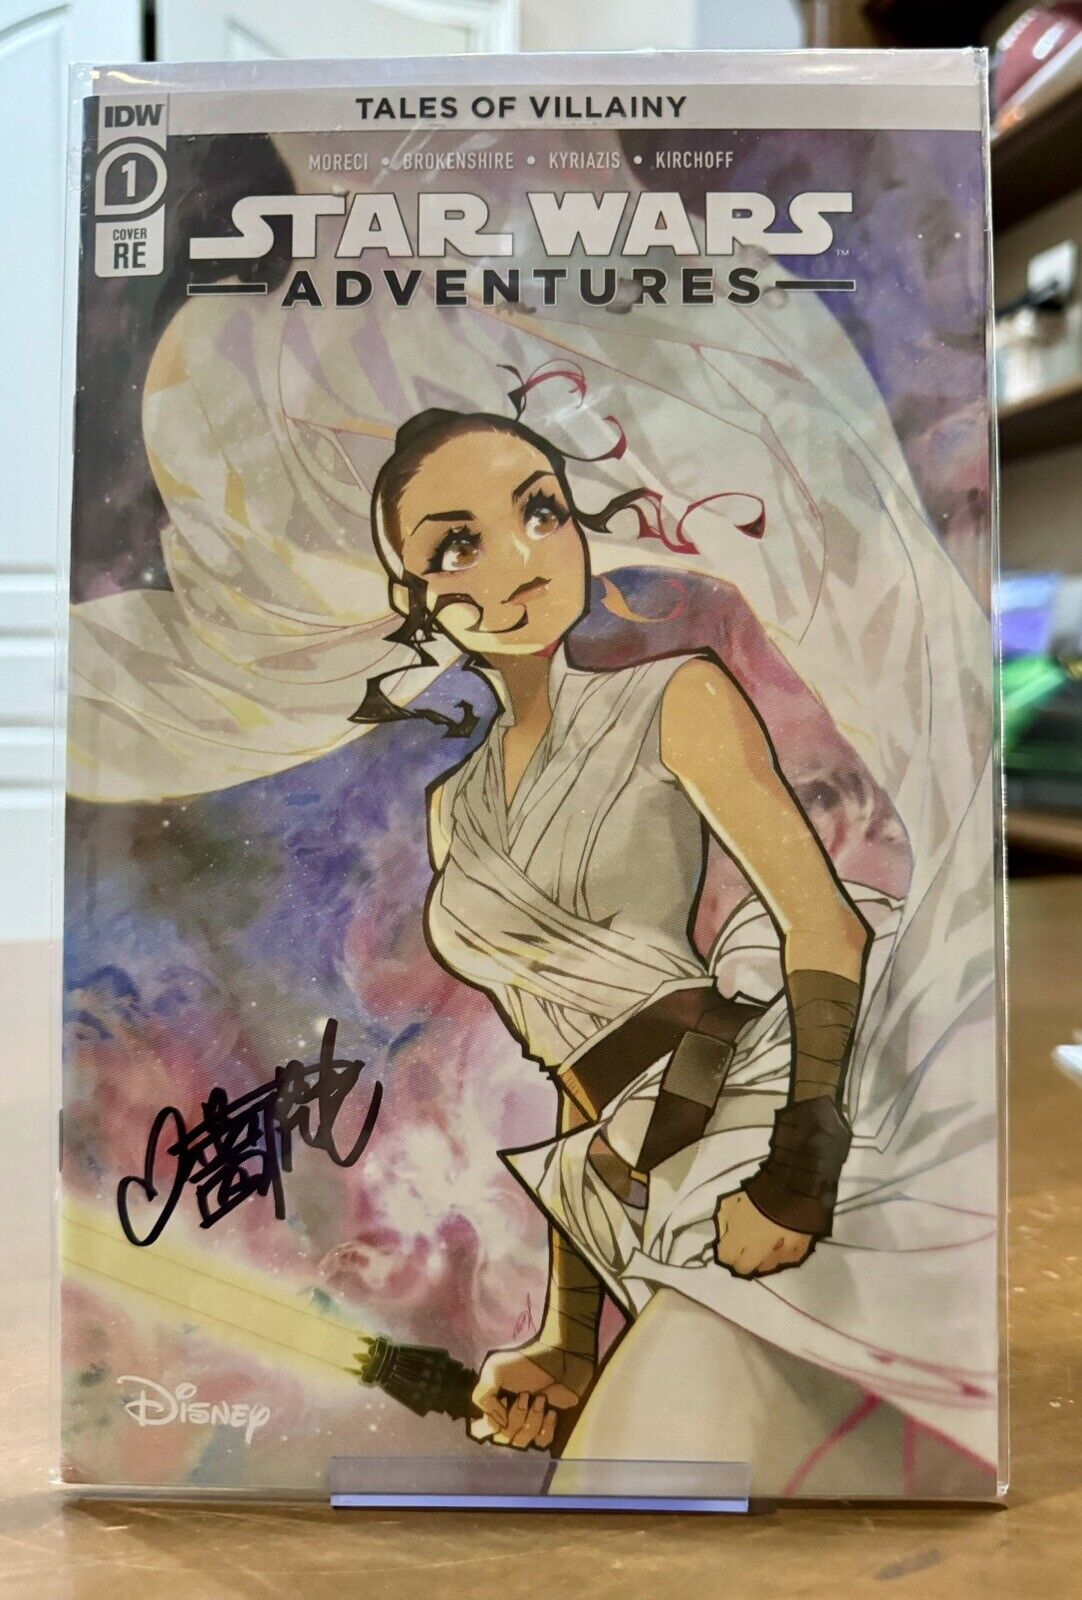 STAR WARS ADVENTURES #1 Signed by Rose Besch (IDW Comics) VF/NM